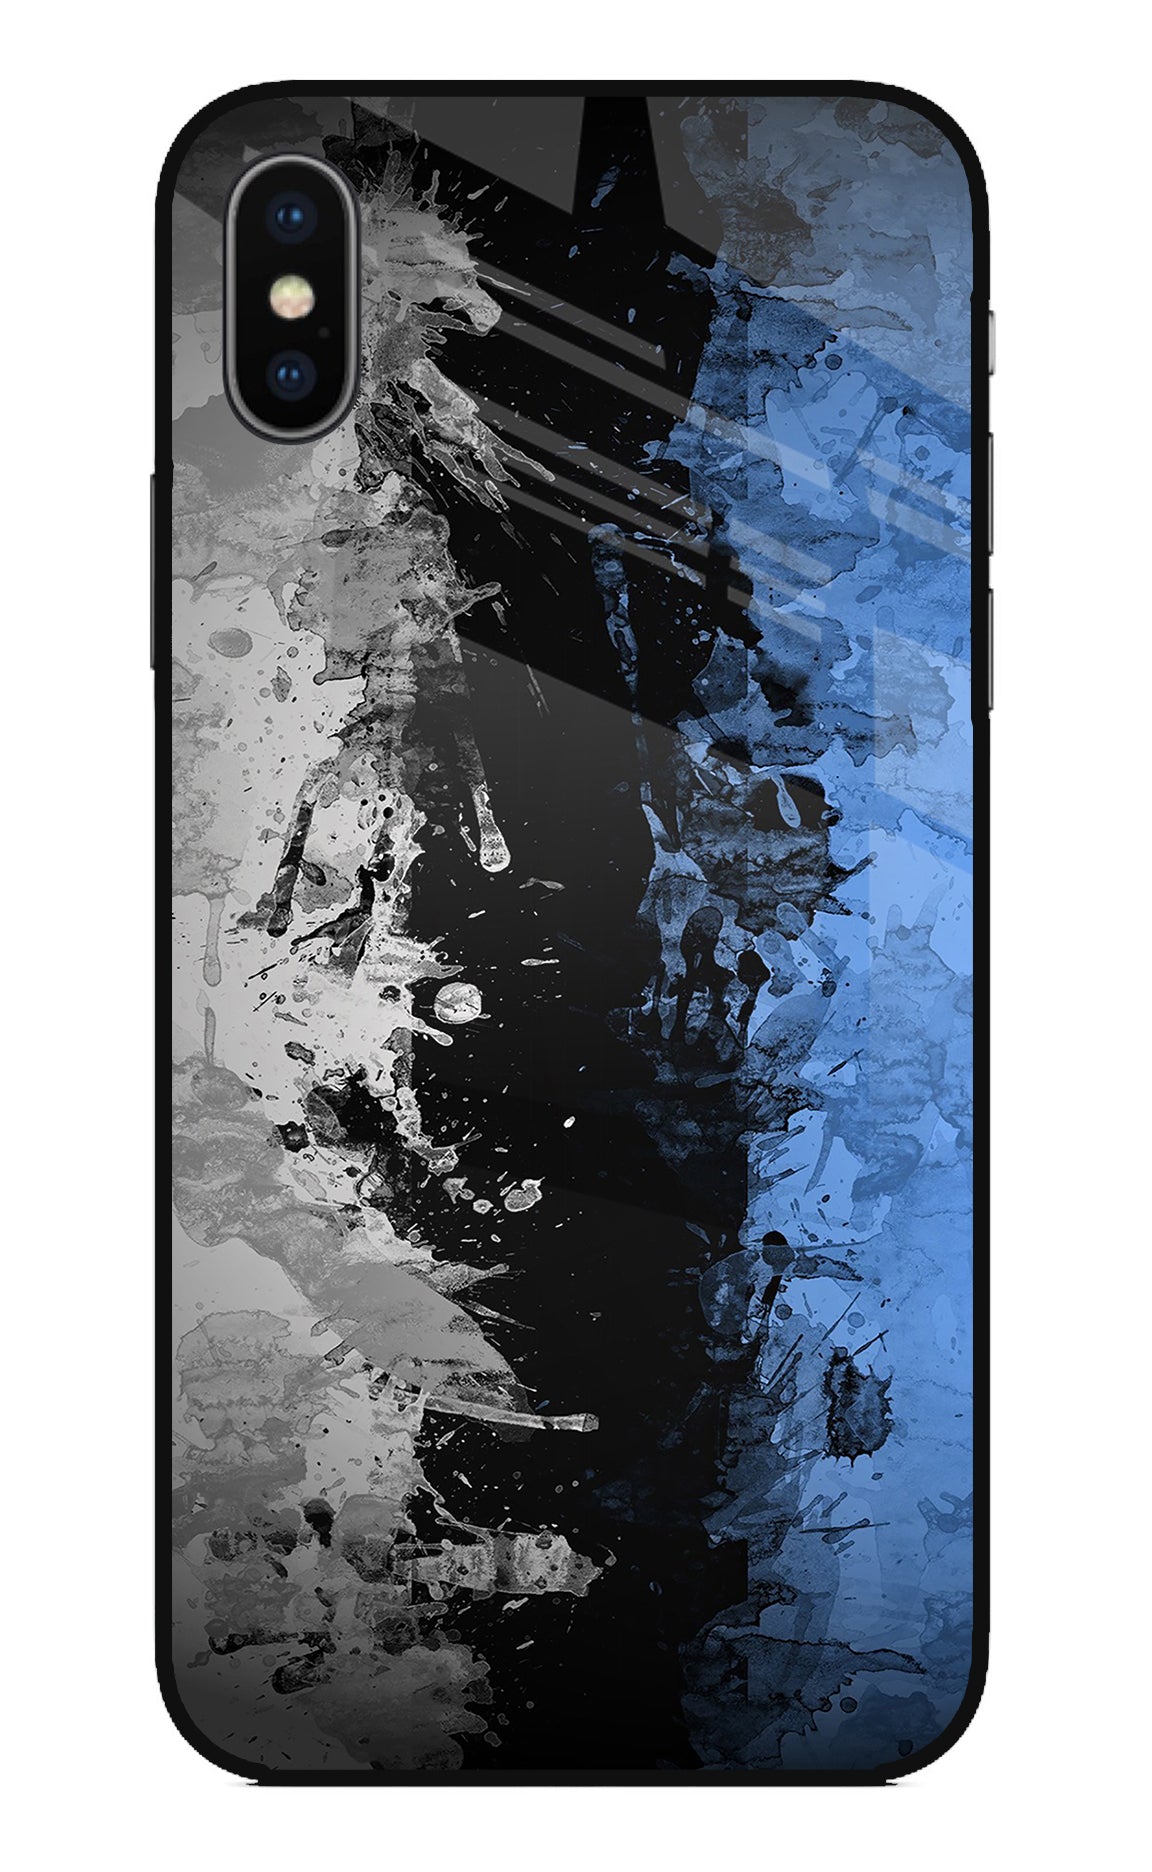 Artistic Design iPhone X Back Cover